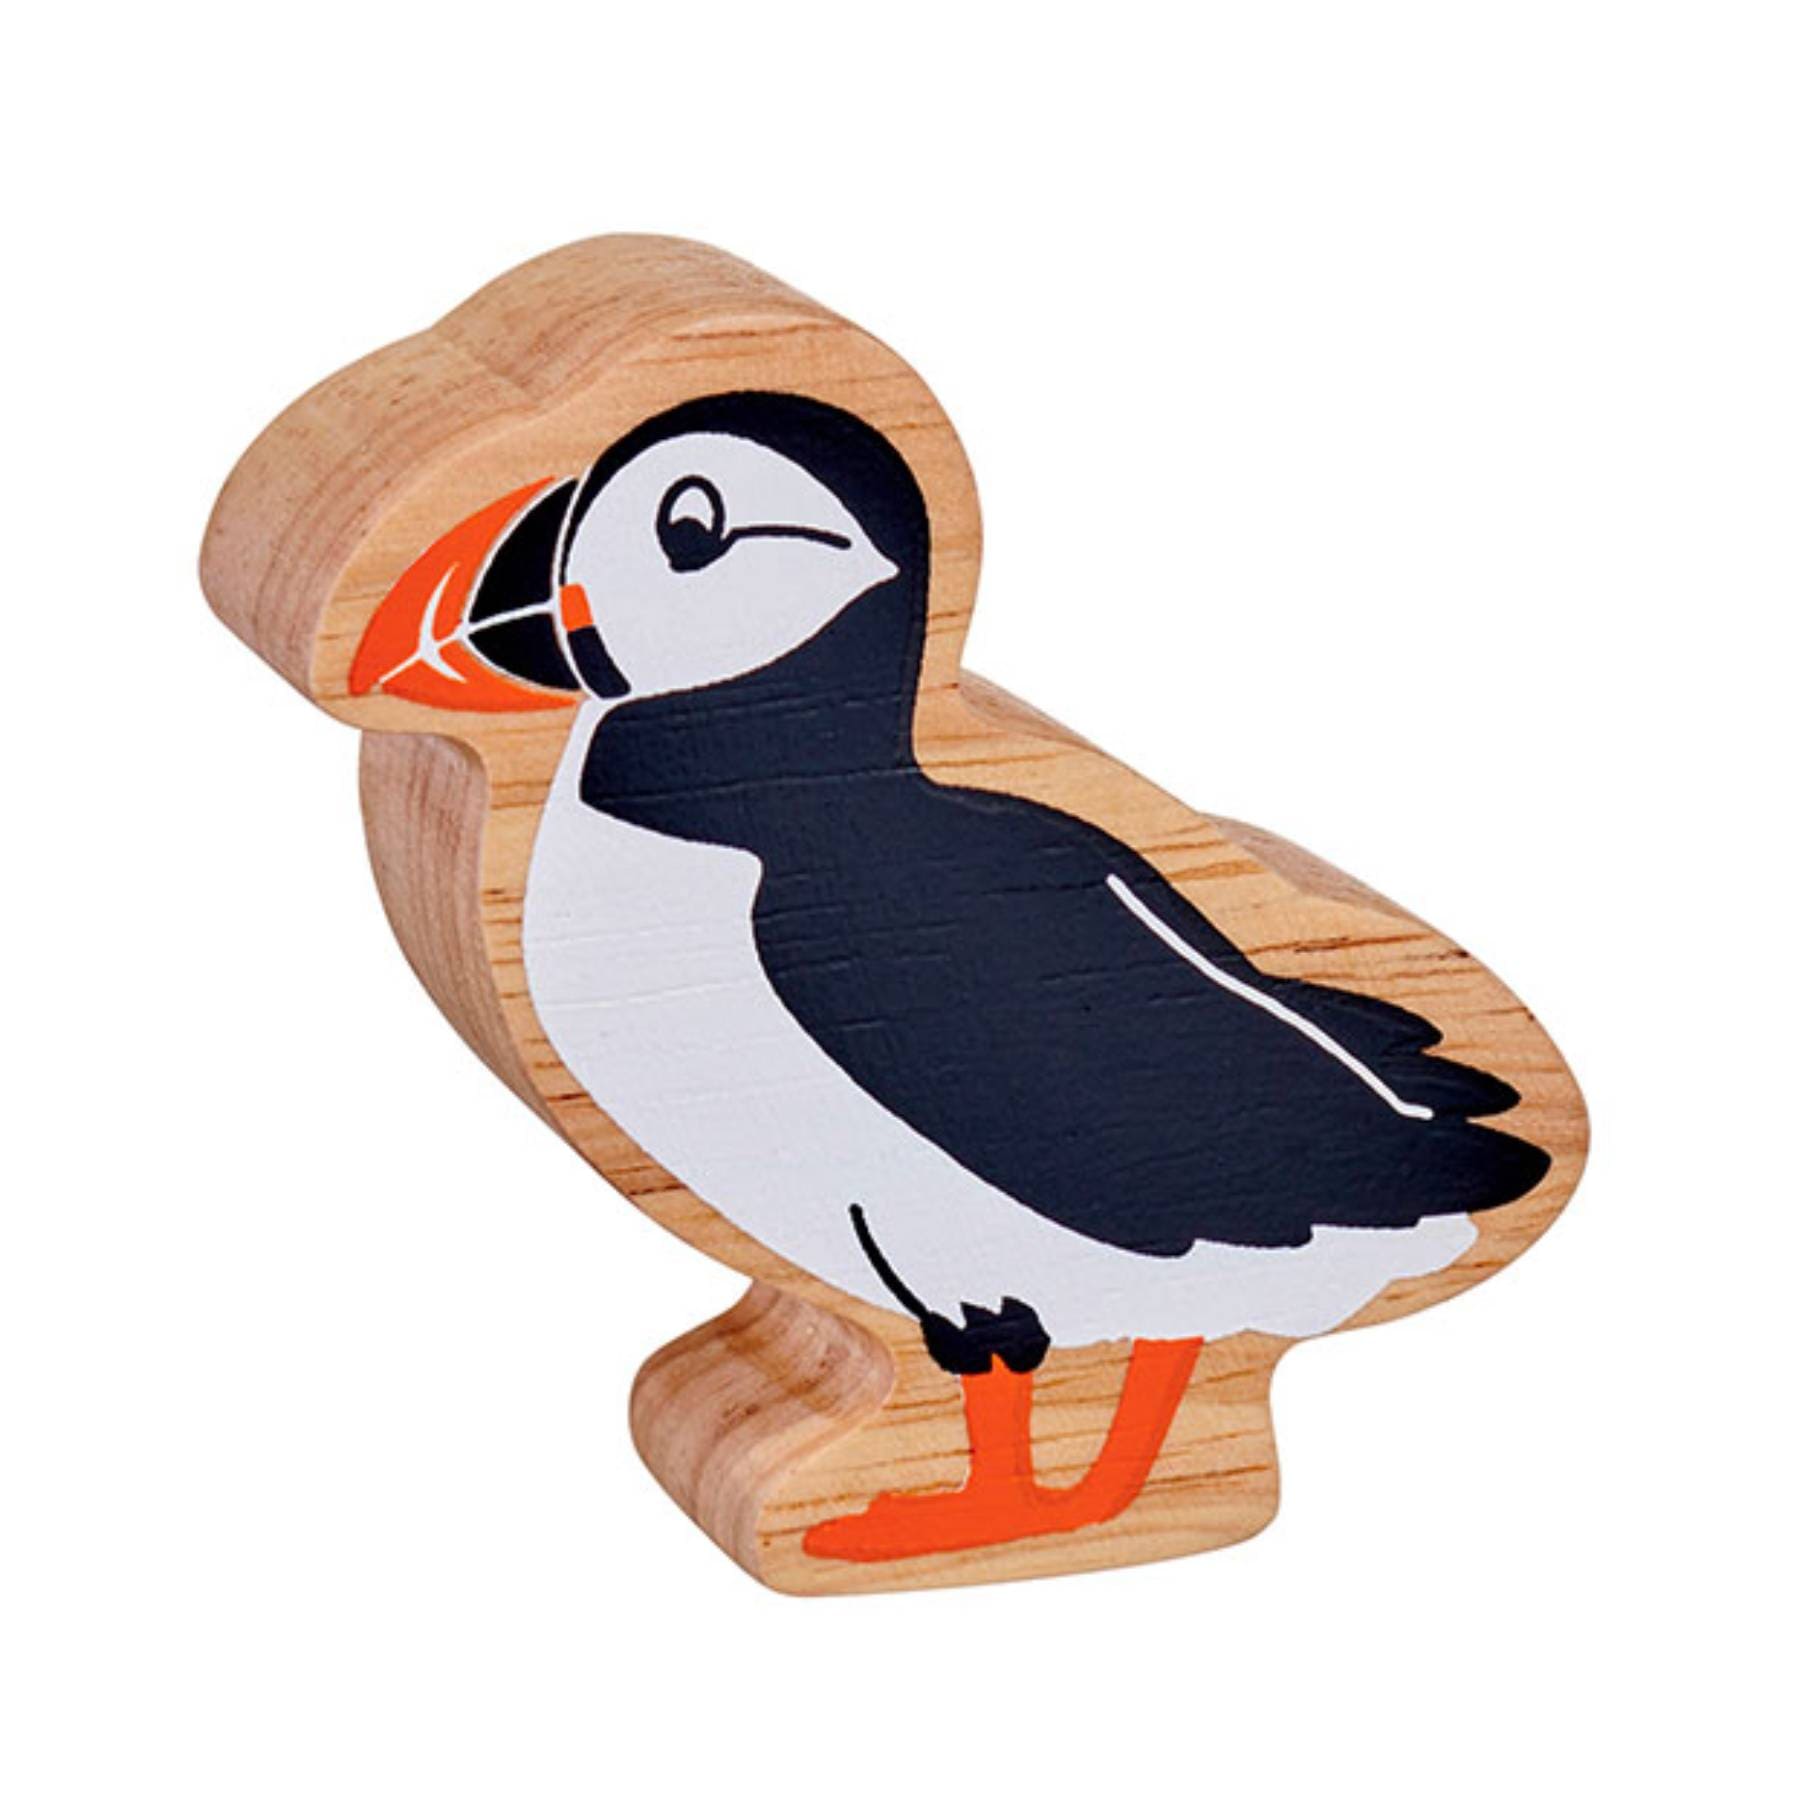 Wooden puffin figure